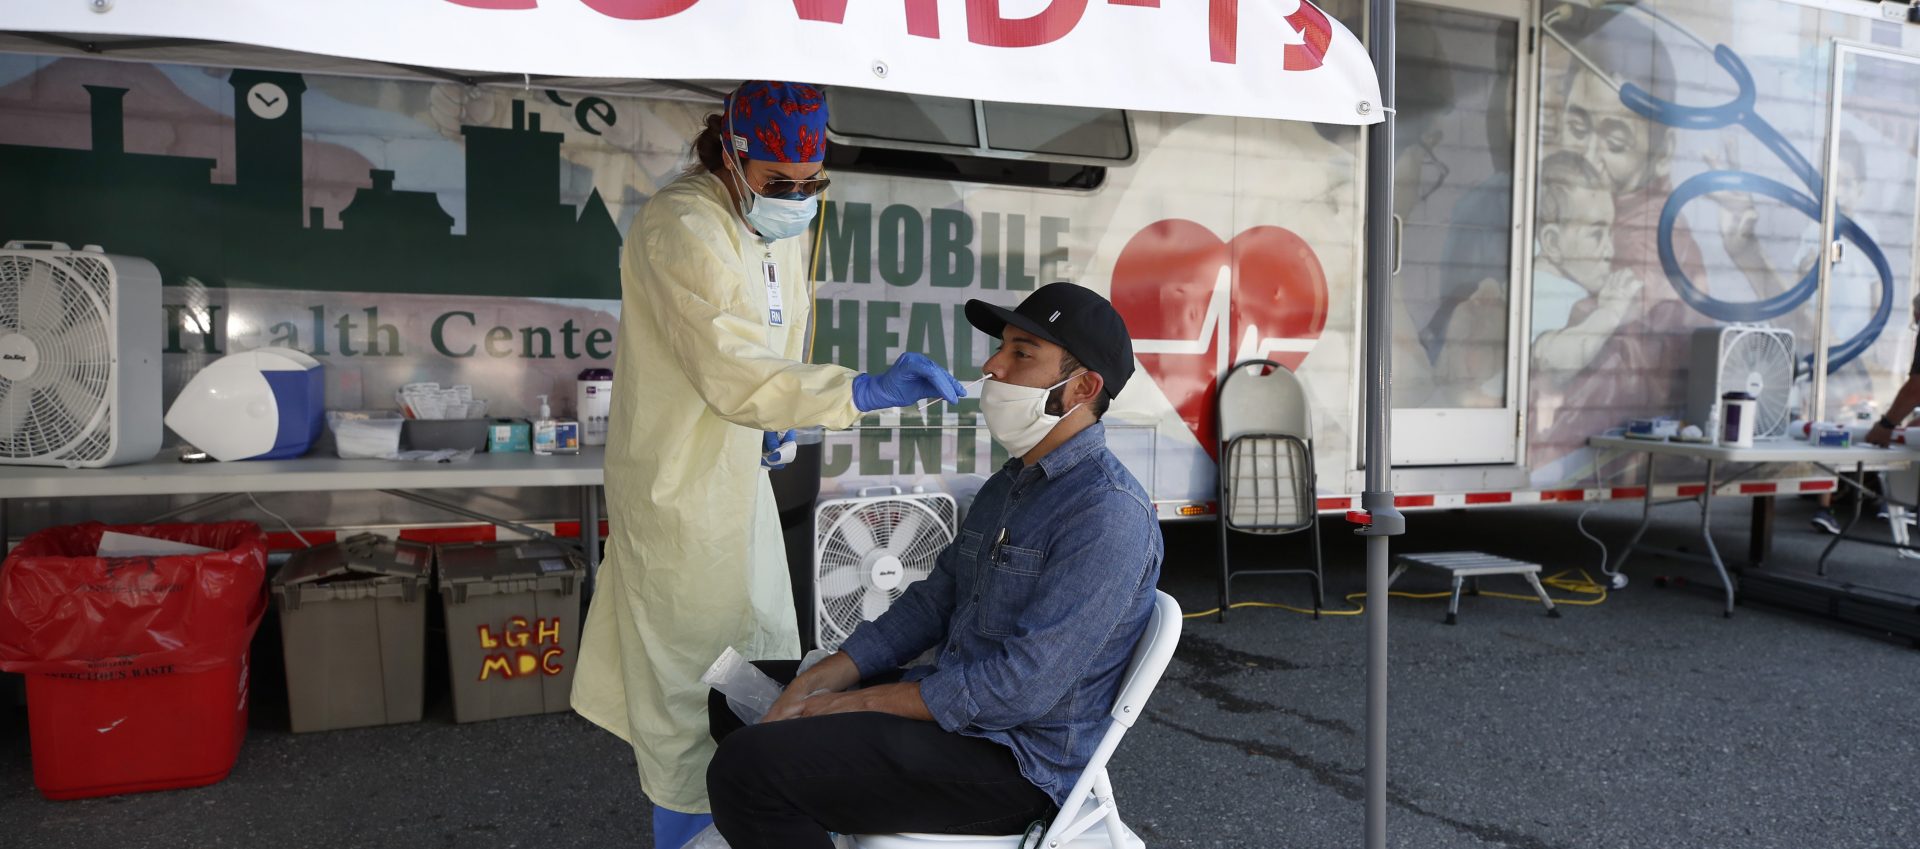 Nurse Tanya Markos administers a coronavirus test on patient Ricardo Sojuel at a mobile COVID-19 testing unit, Thursday, July 2, 2020, in Lawrence, Mass.